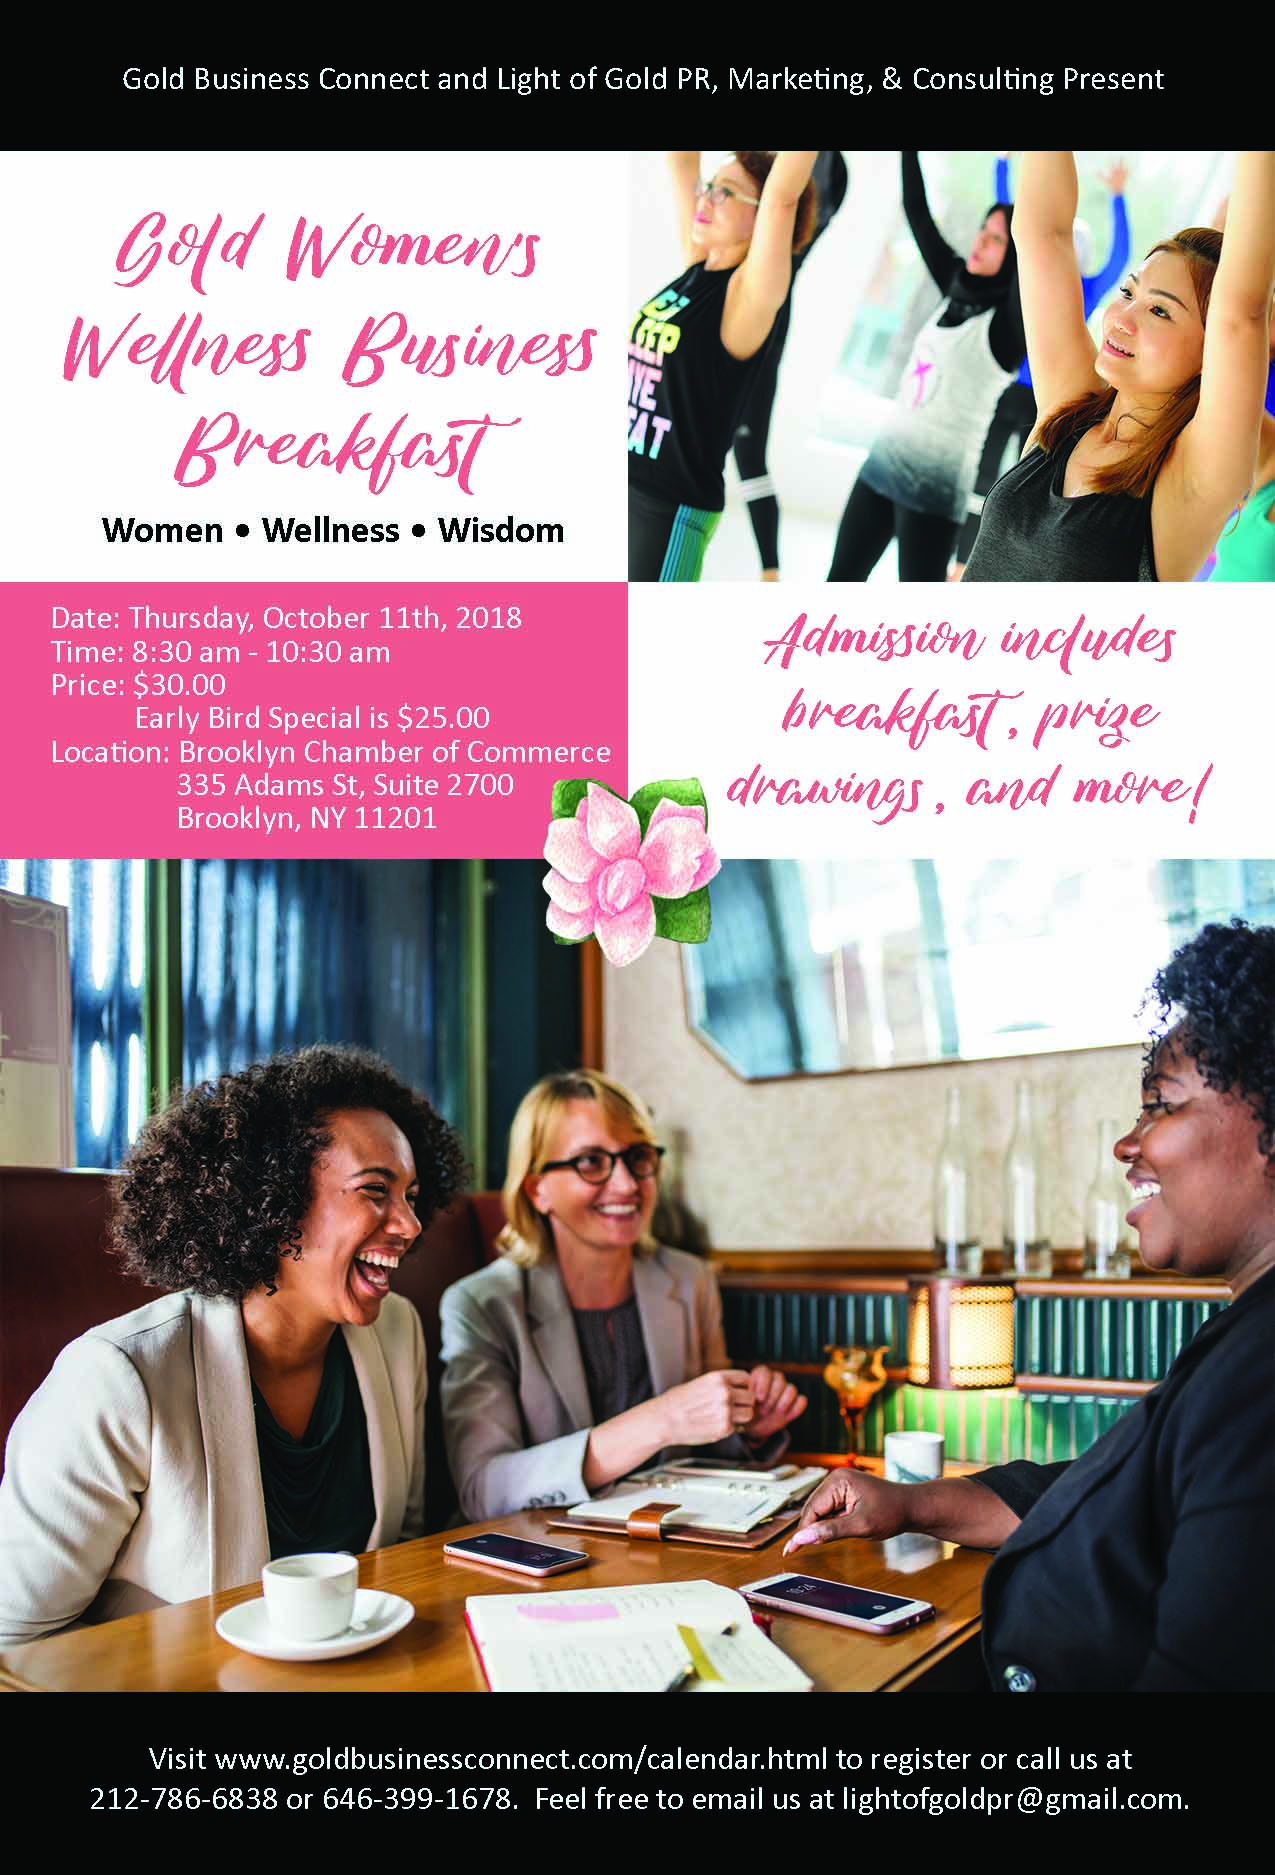 Gold Women's Wellness Business Event, New York, United States